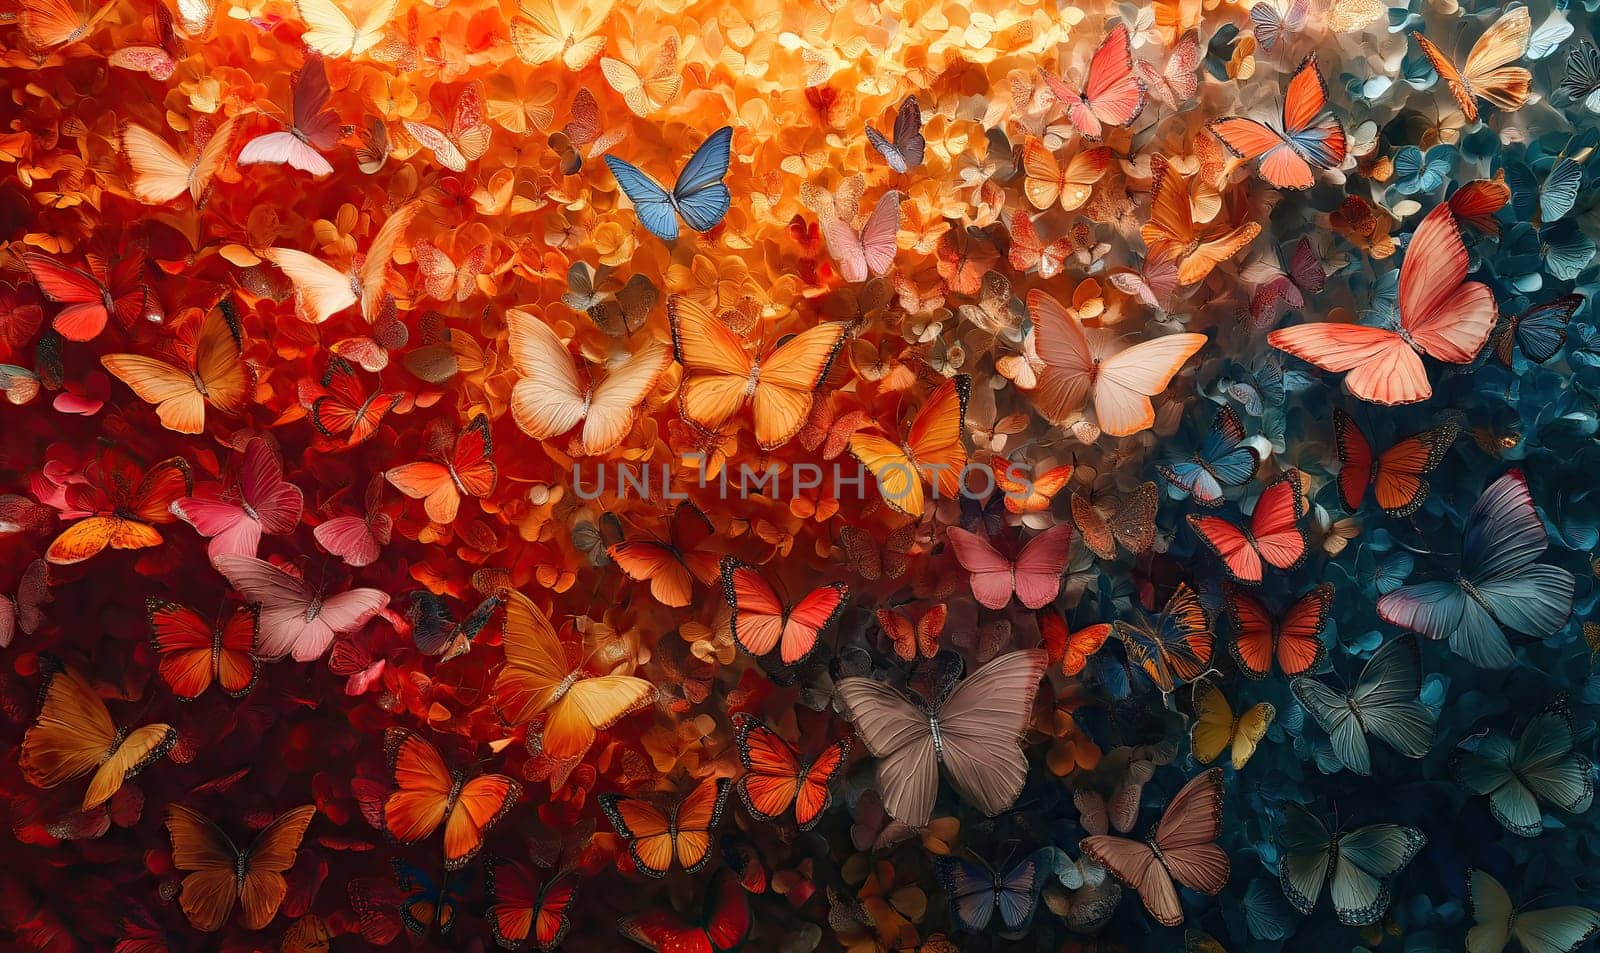 Colorful background of multi-colored butterflies full frame. Selective soft focus